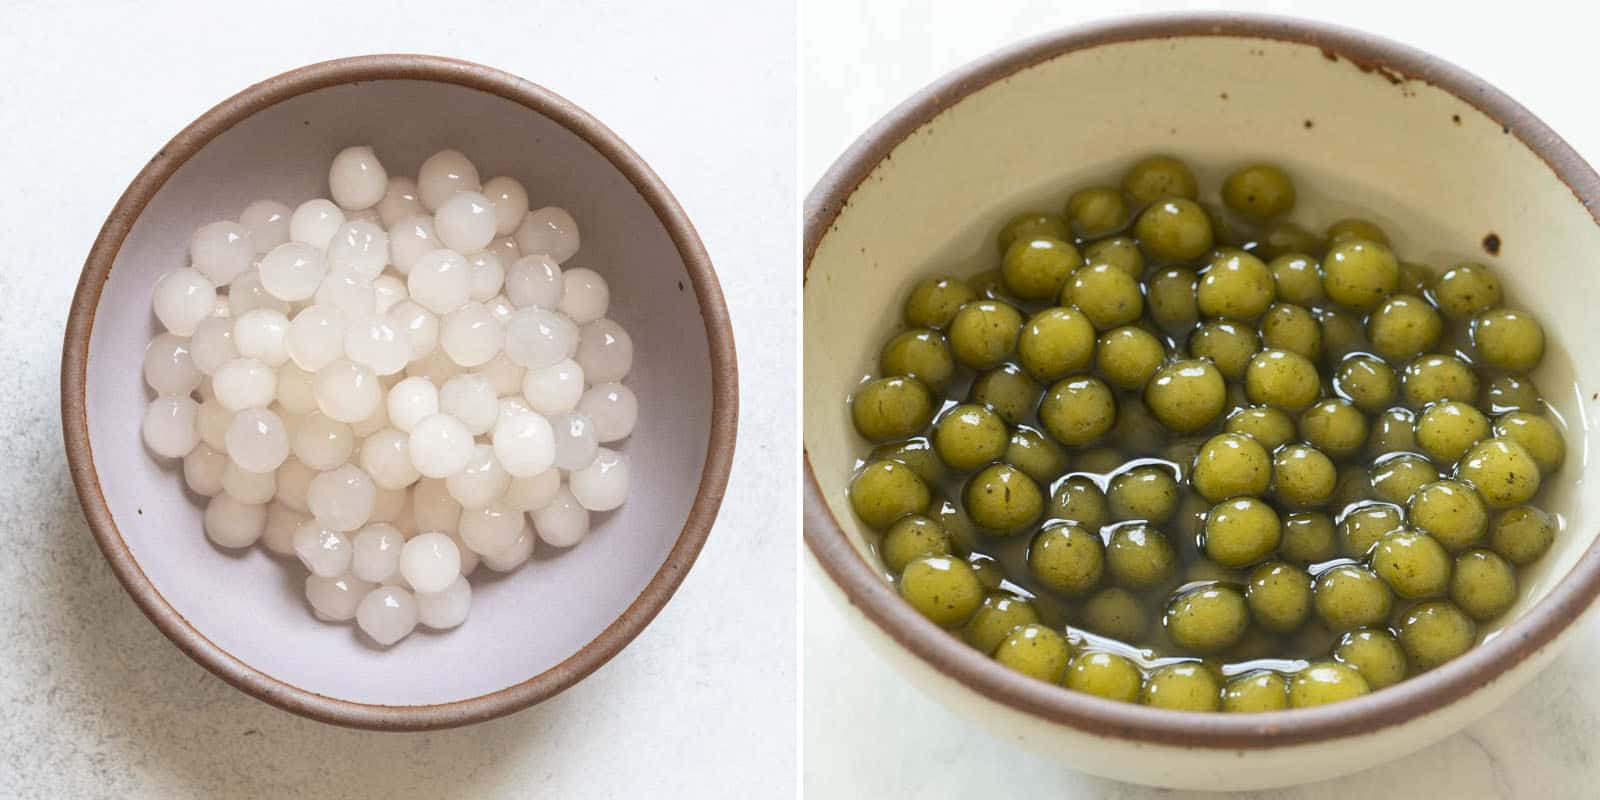 White and green tapioca pearls (boba pearls)